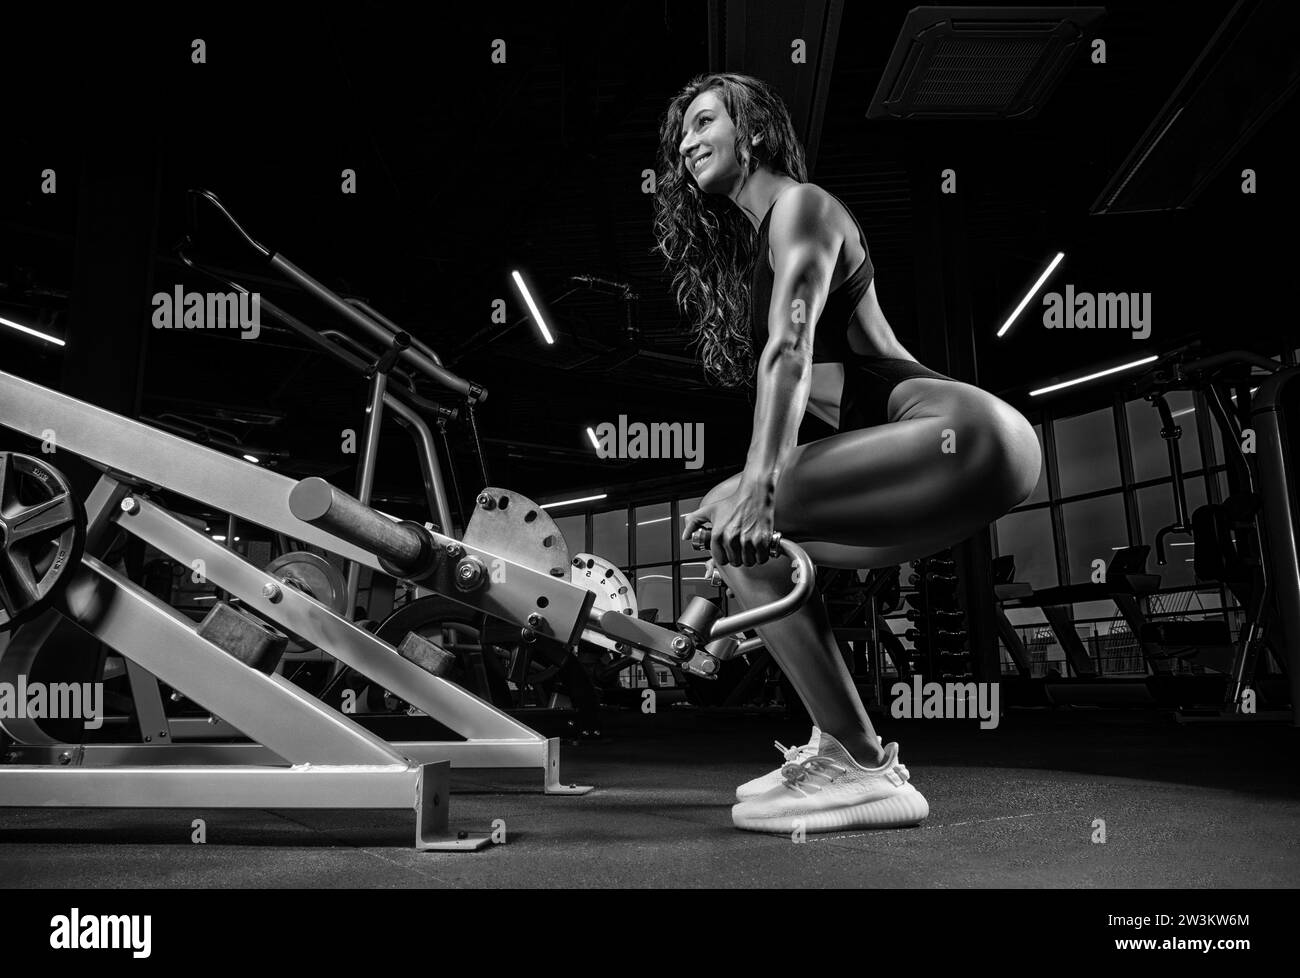 Tall athletic woman squats in the gym in a special apparatus. Deadlift. Fitness and bodybuilding concept. Mixed media Stock Photo